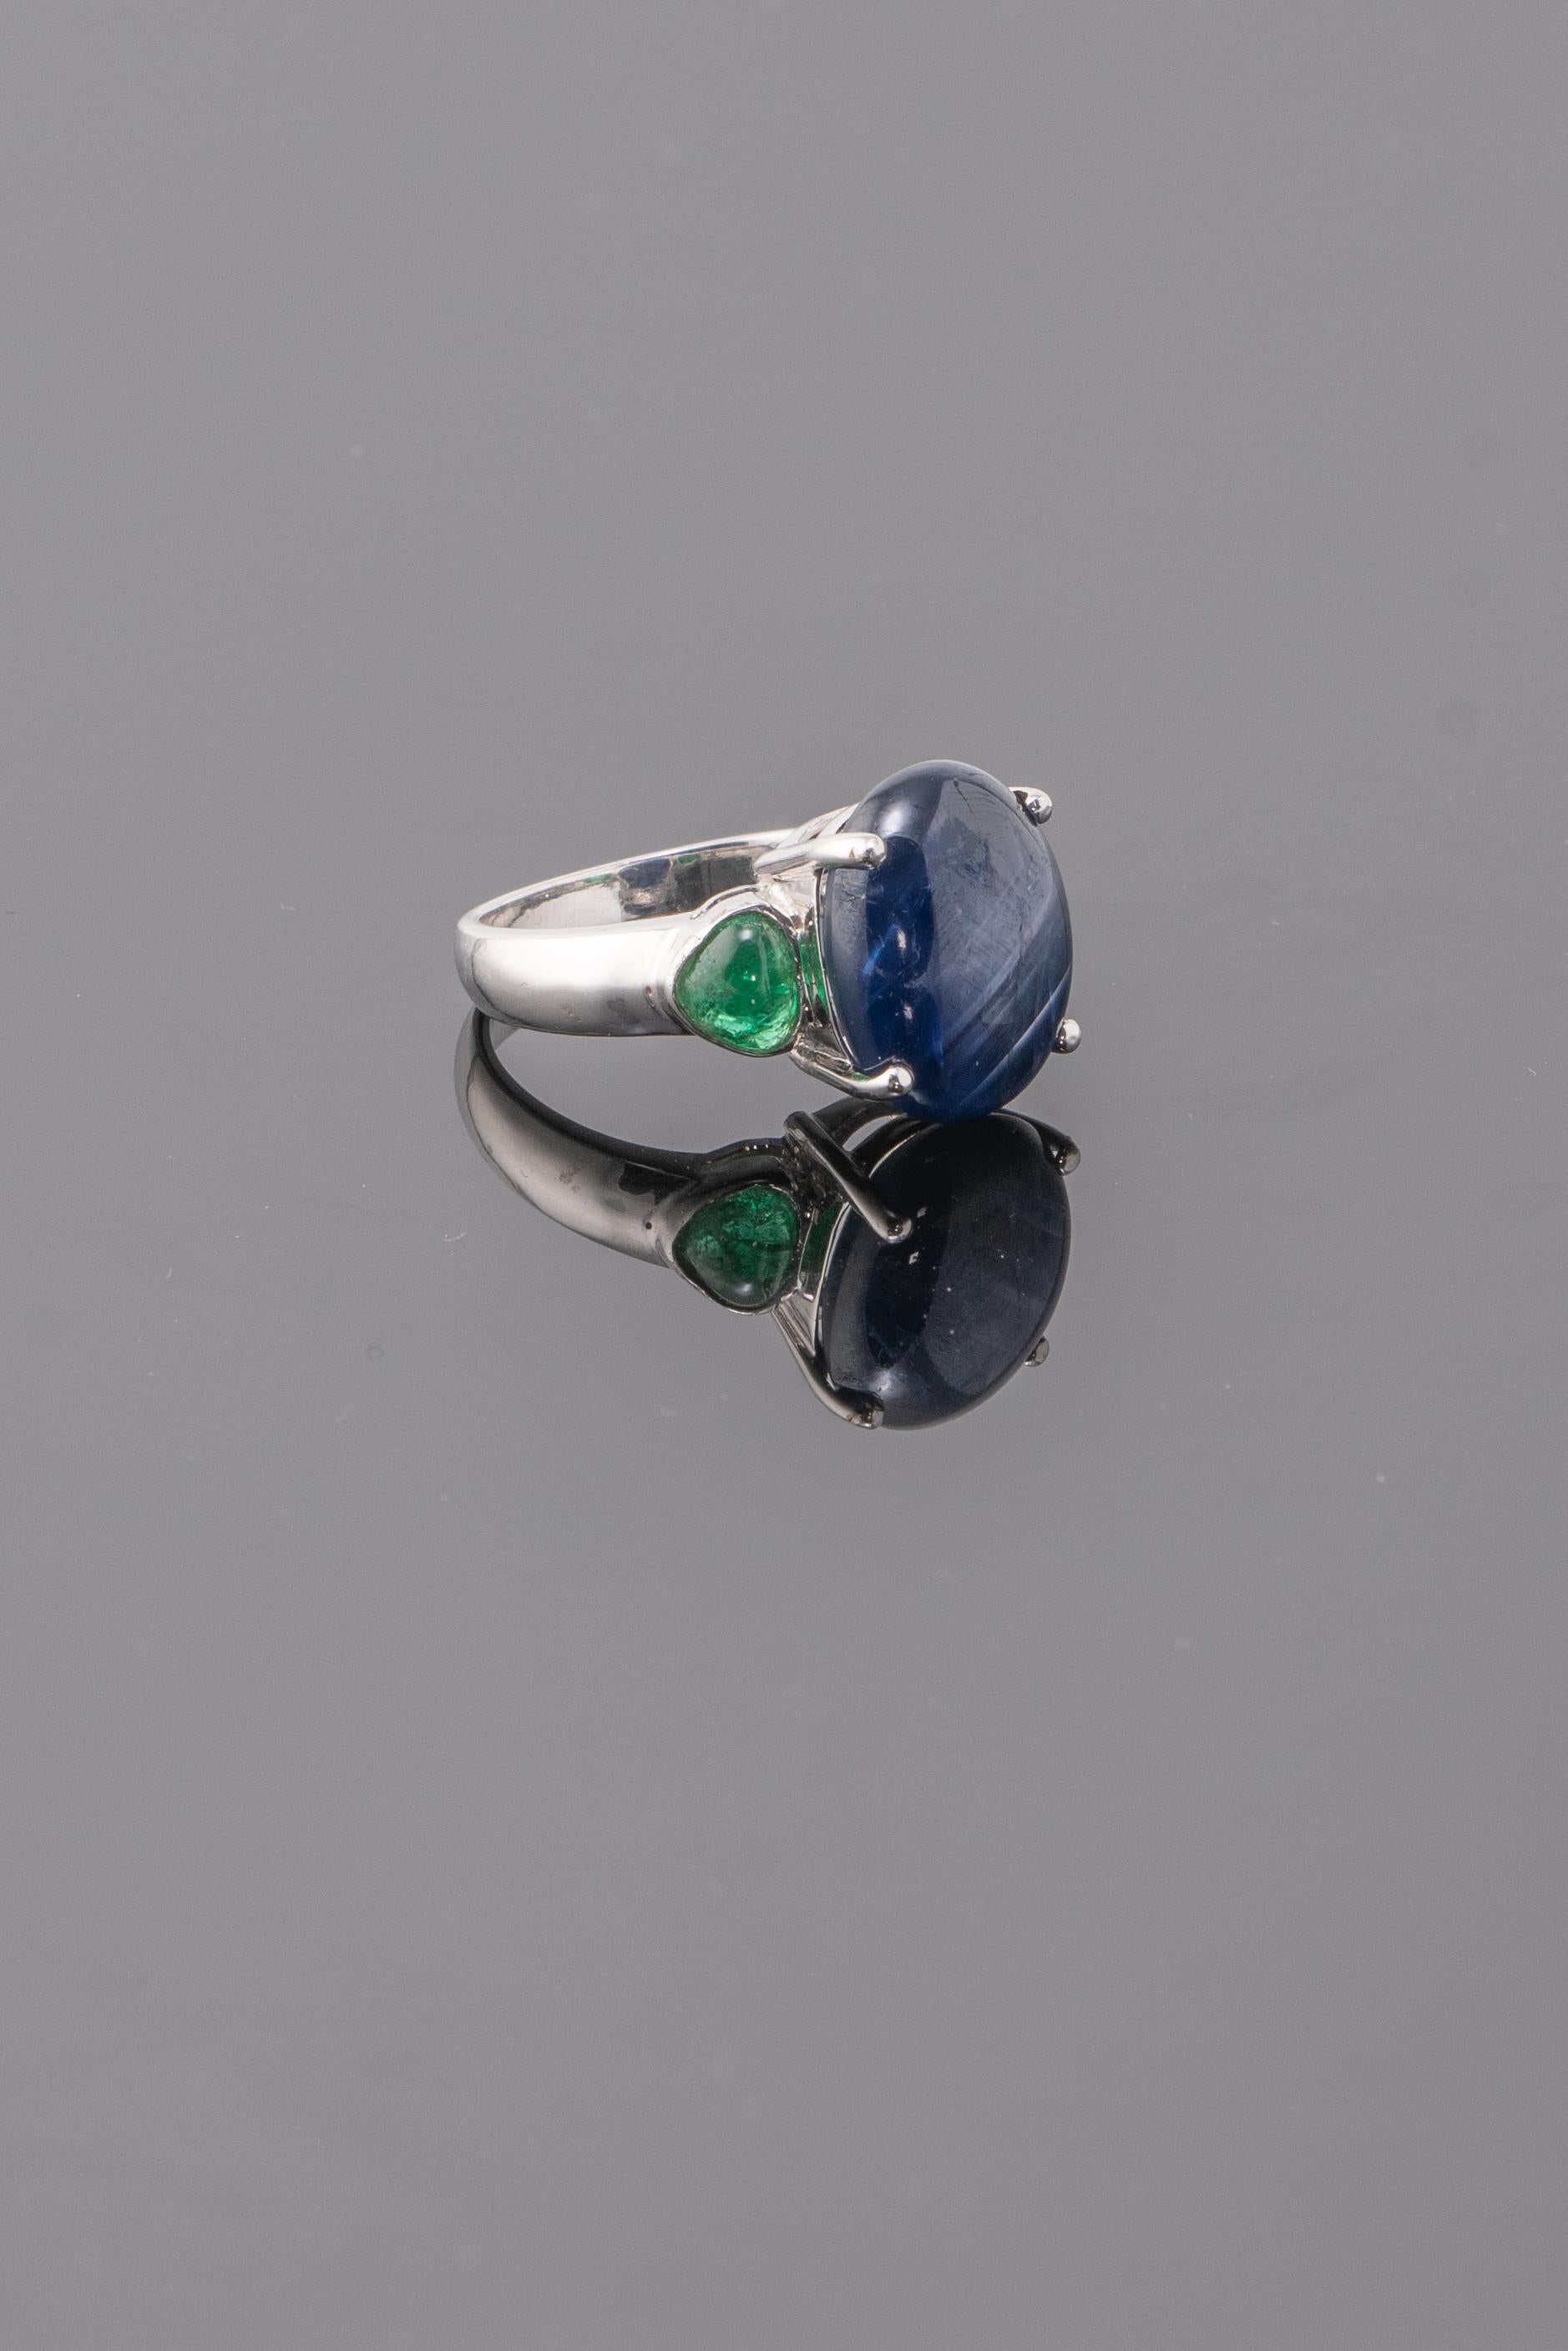 Oval Cut Rare Natural 13.24 Star Sapphire and Emerald Cocktail or Engagement Ring